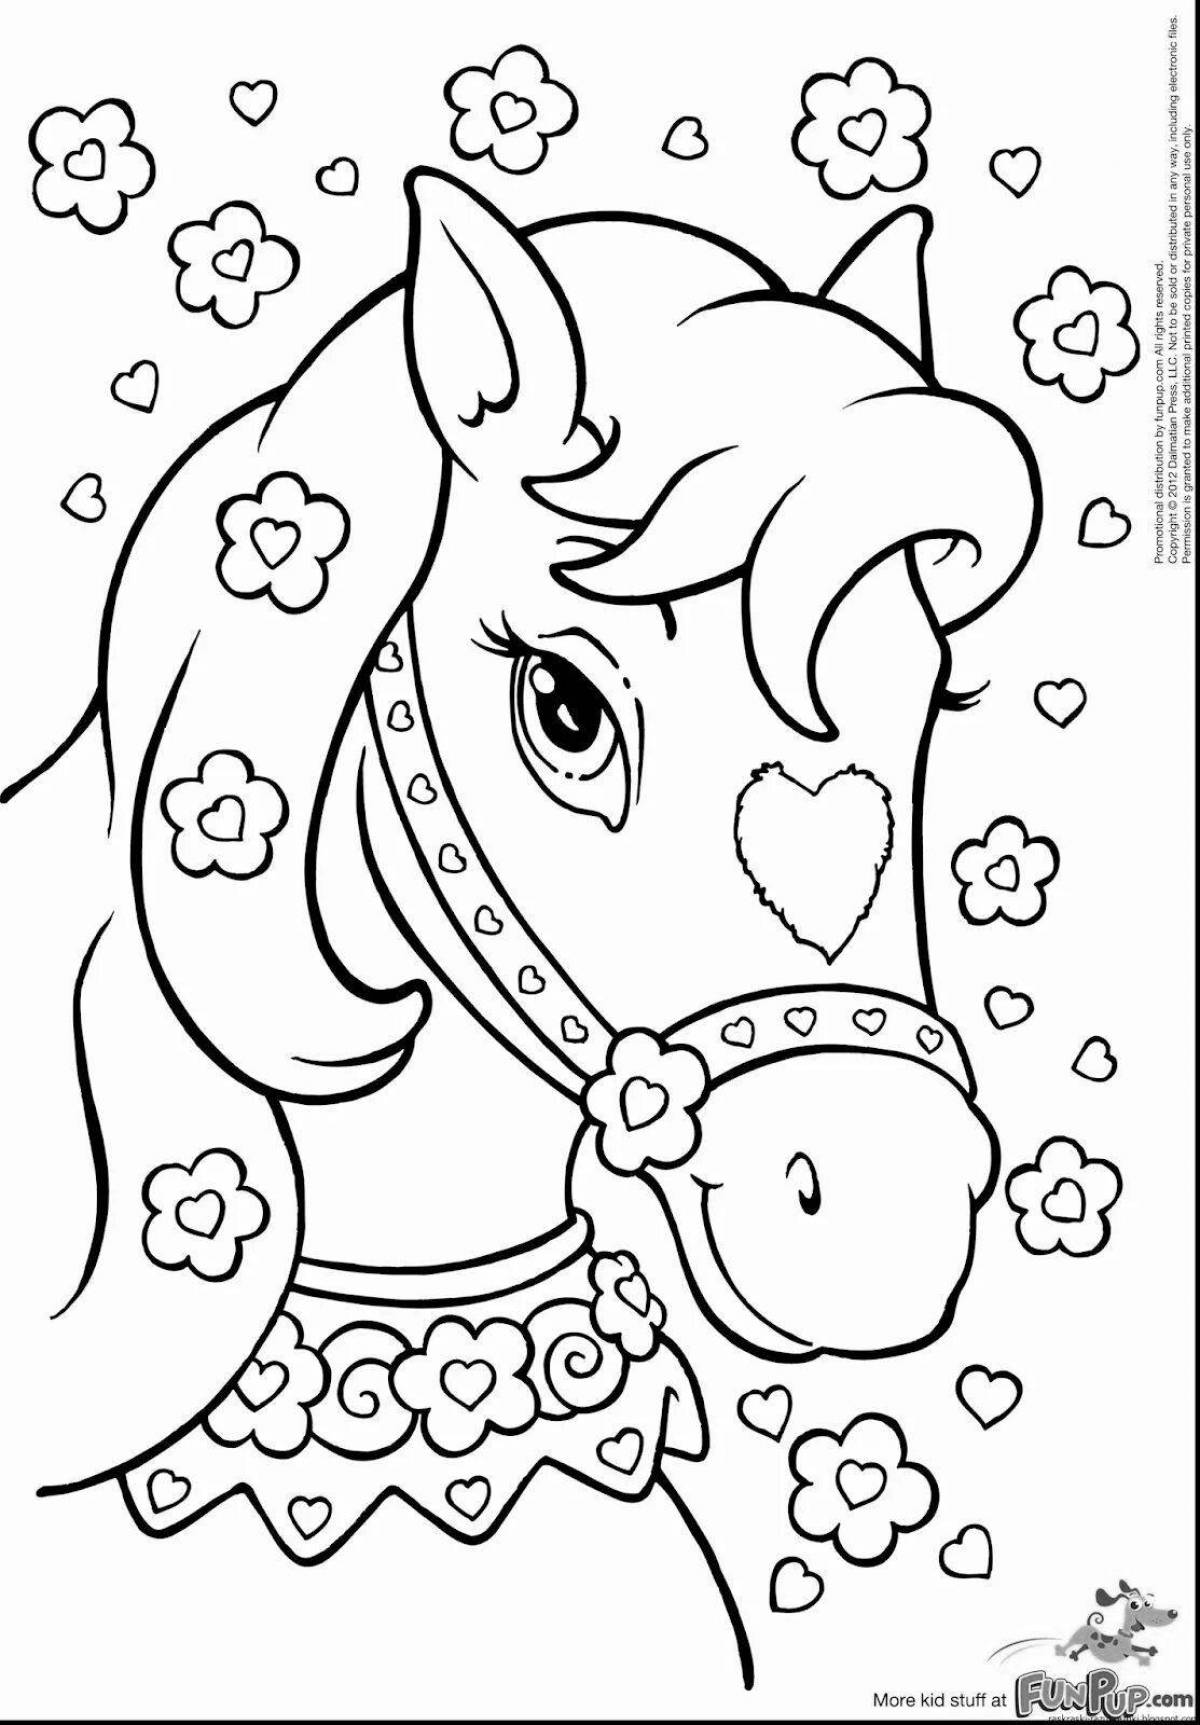 Delightful coloring book for girls 7-8 years old